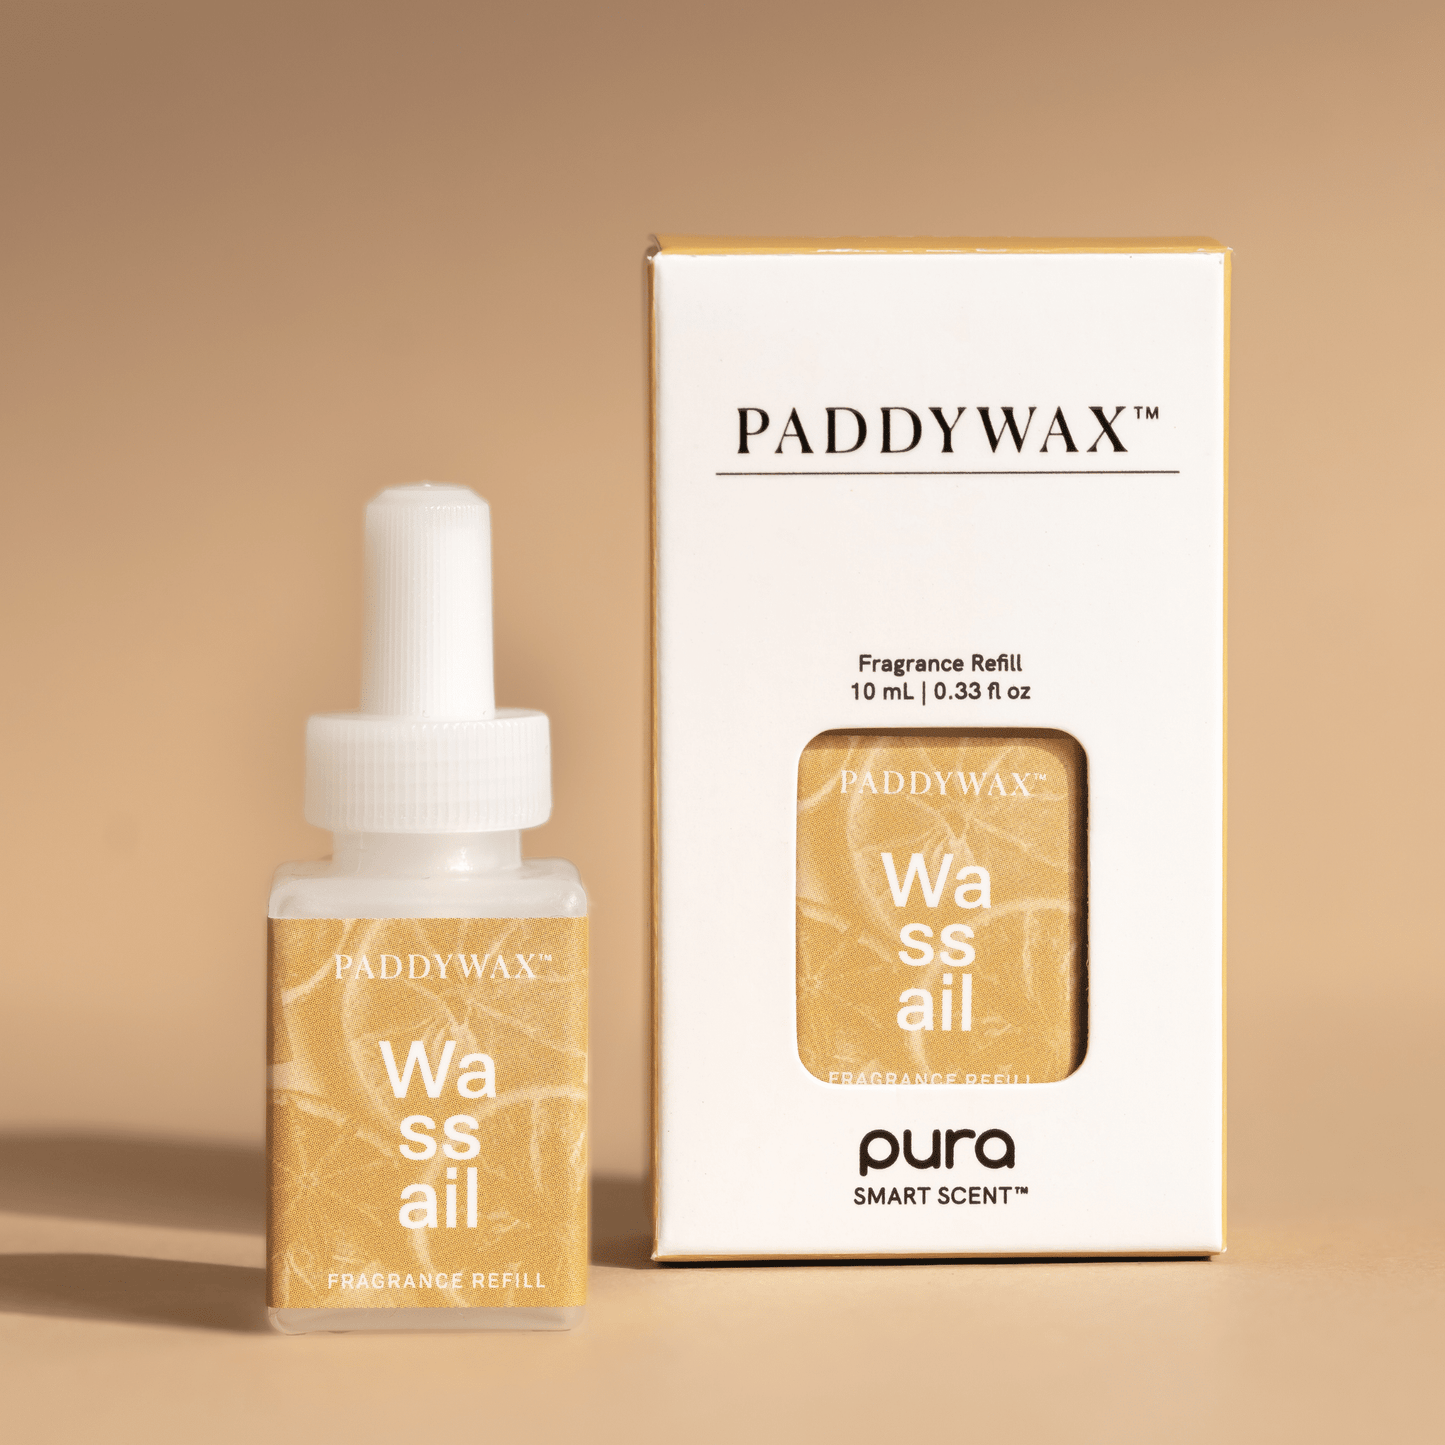 Paddywax fragrance Pura refill Wassail sitting on pale surface